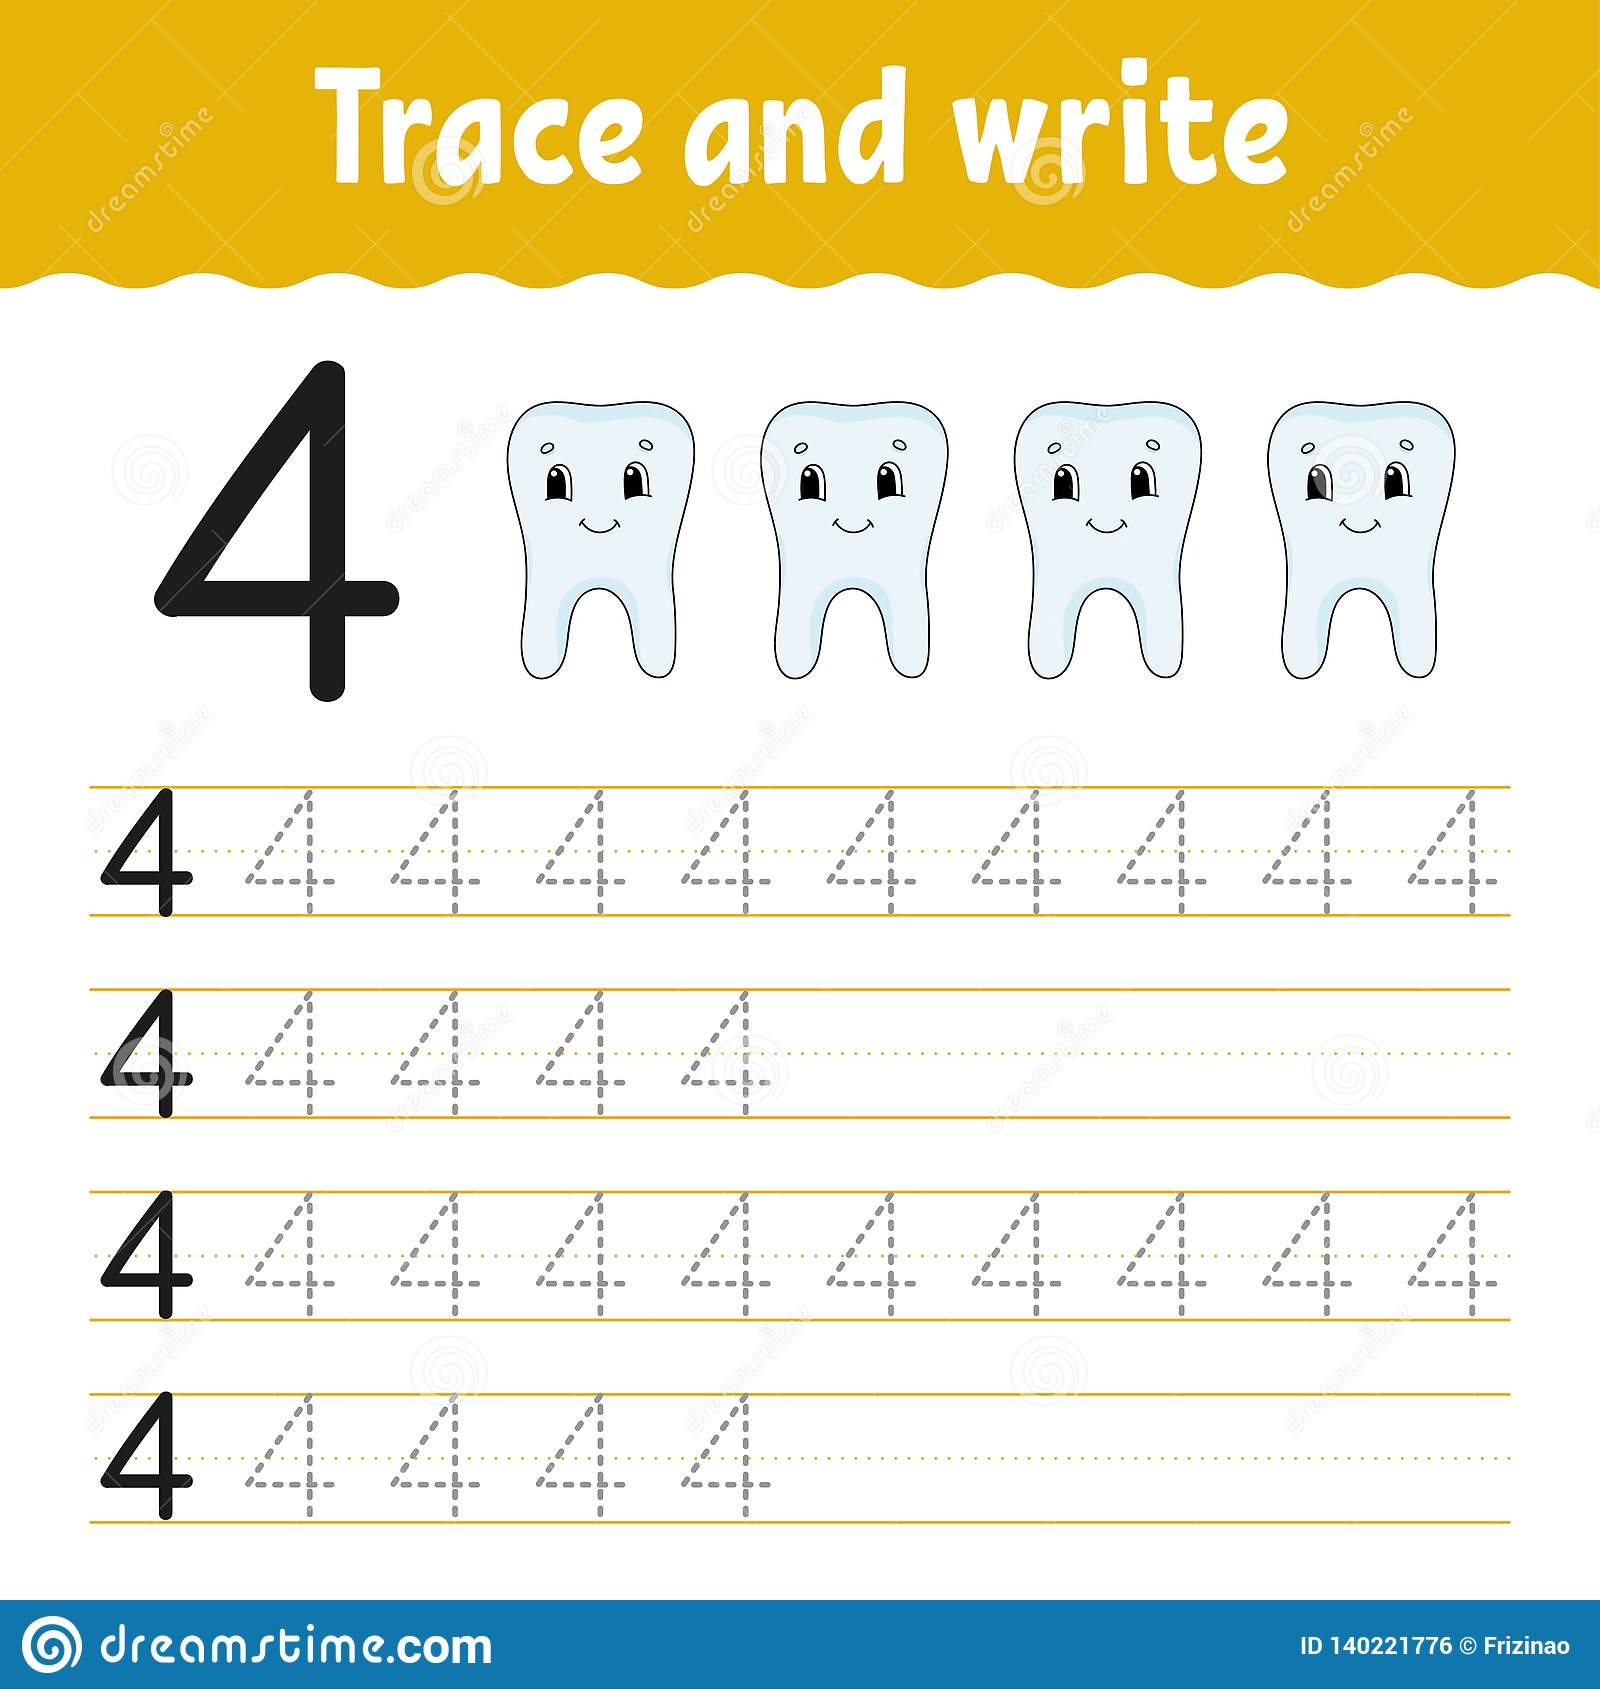 Trace And Write. Handwriting Practice. Learning Numbers For